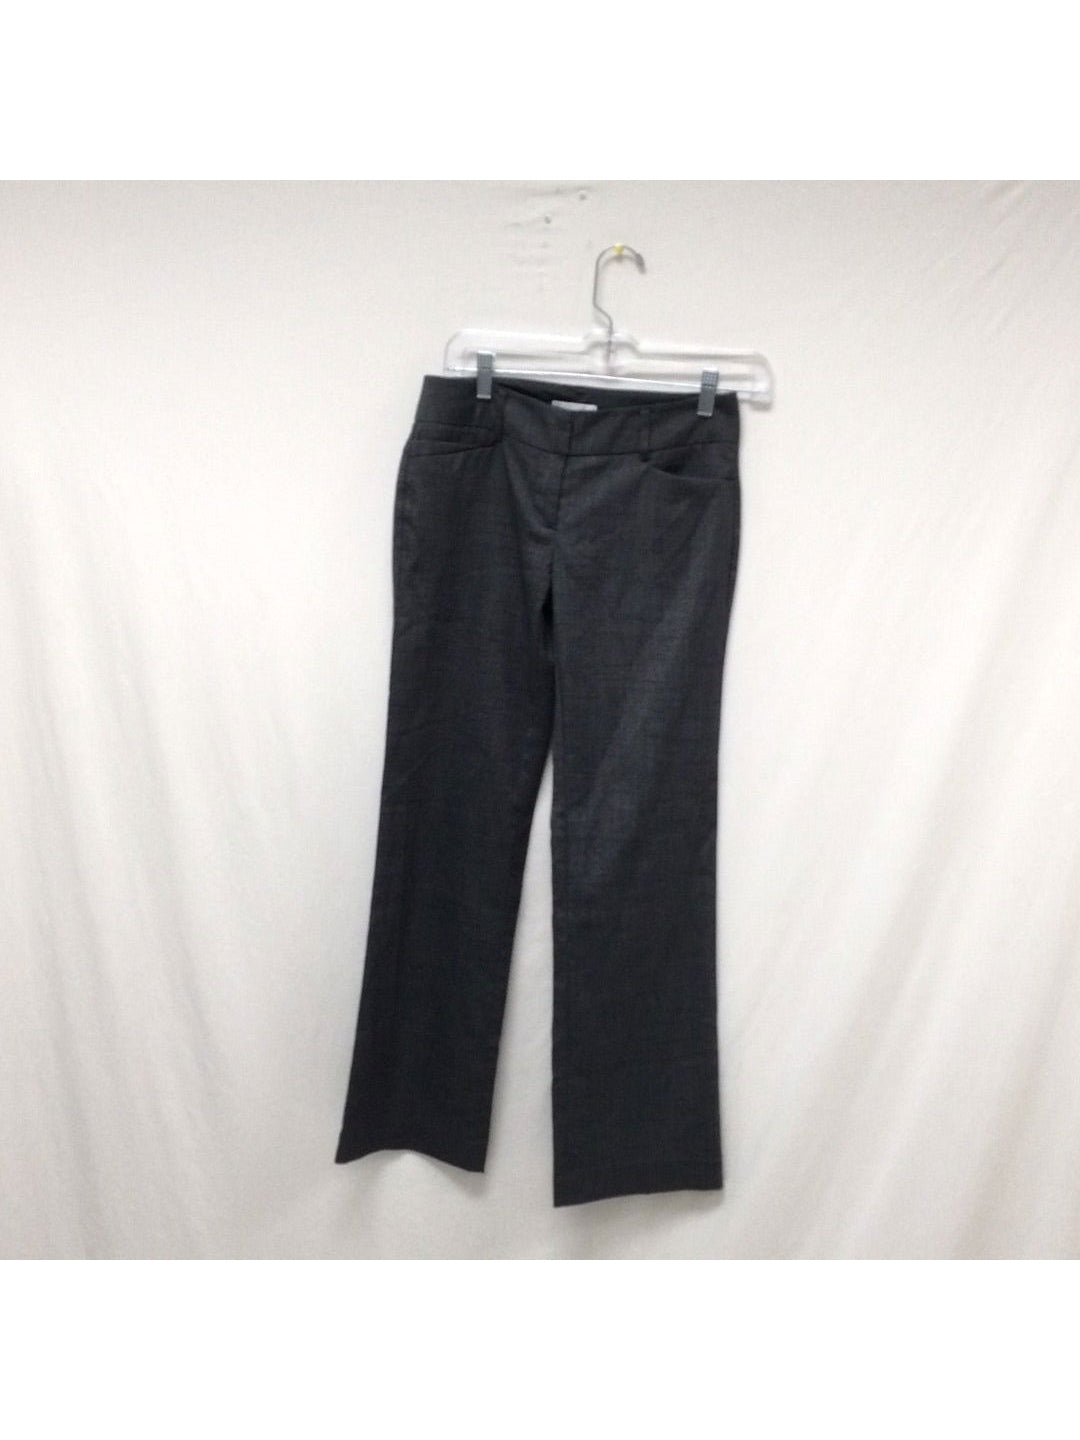 New York & Company Women's Black Pants - The Kennedy Collective Thrift - 